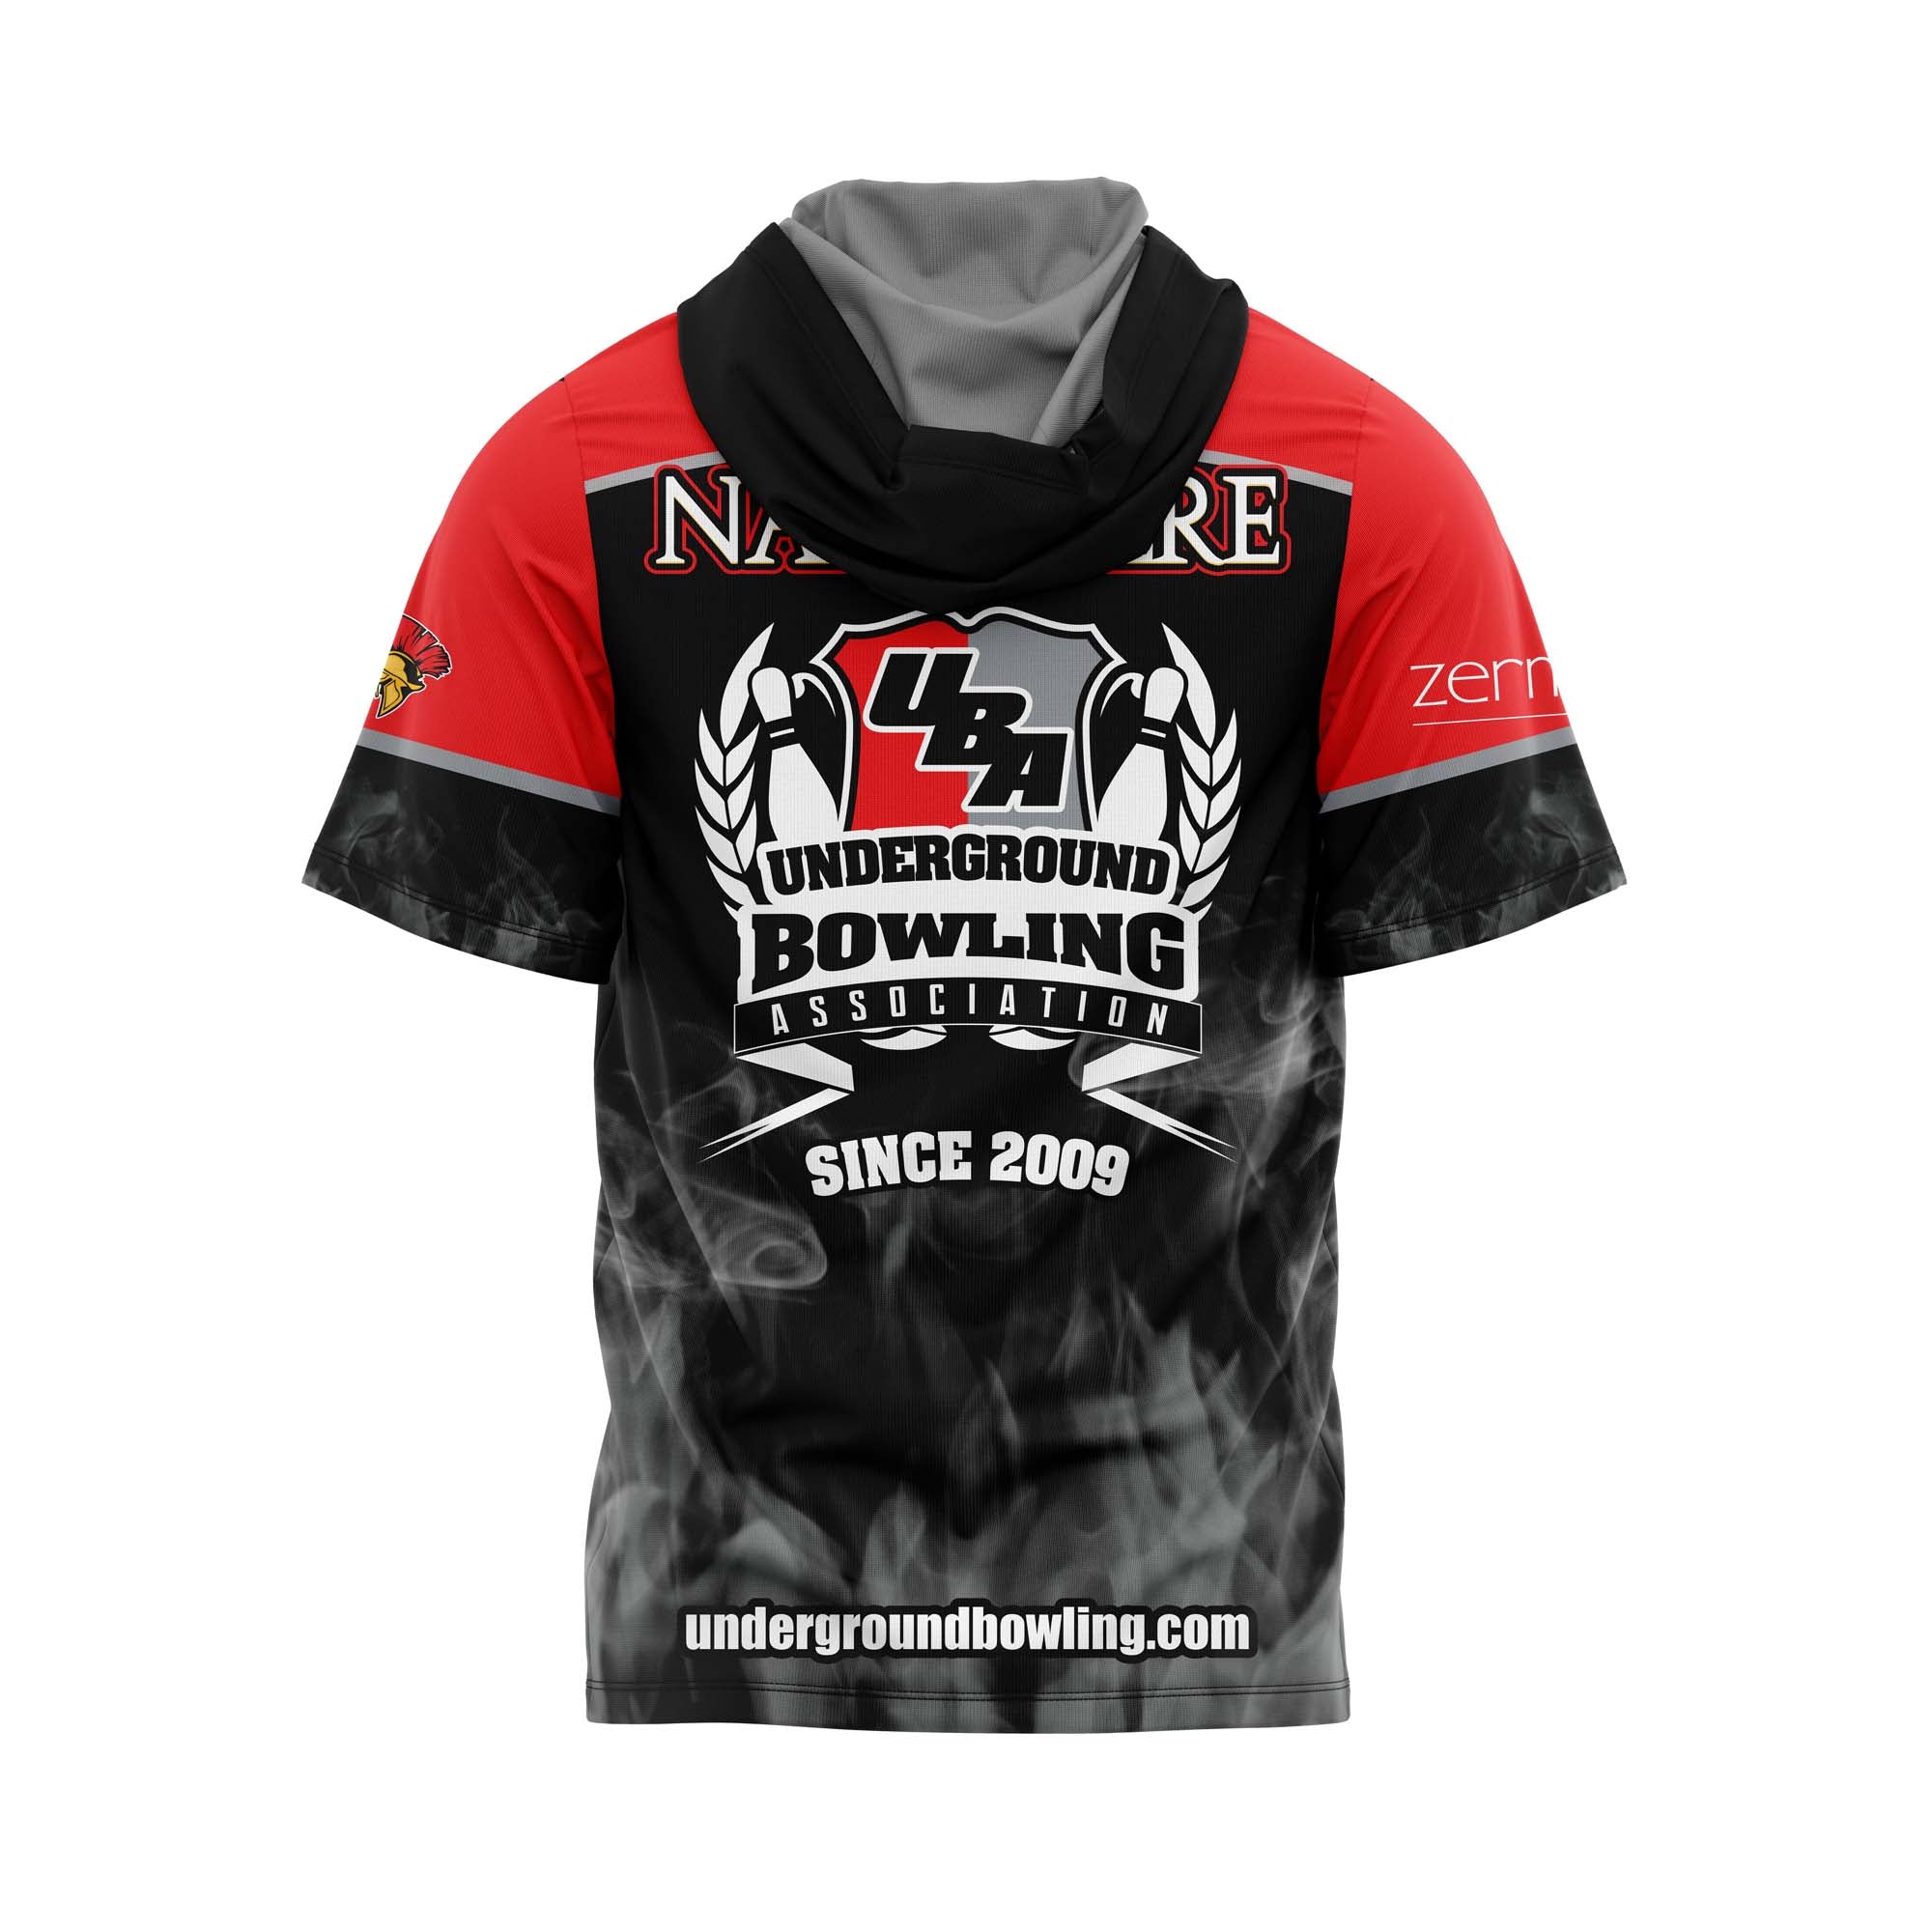 Jersey Spartans Red Jersey